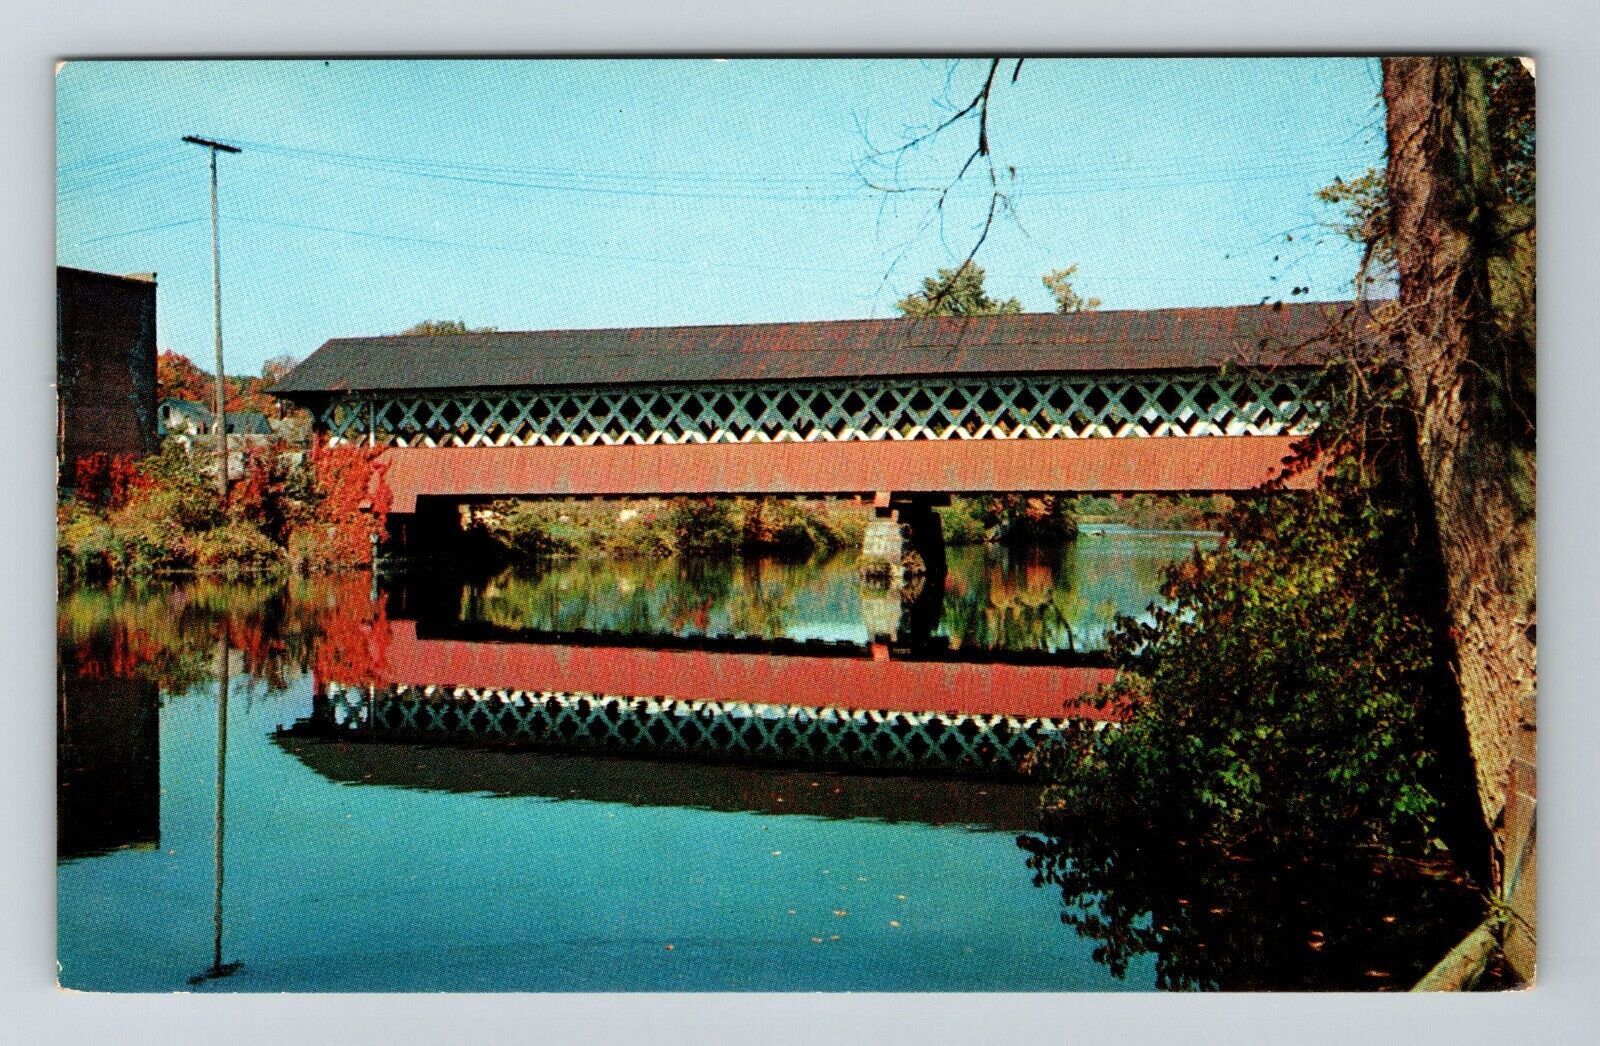 West Swanzey NH-New Hampshire, Covered Bridge Over River, Vintage Postcard